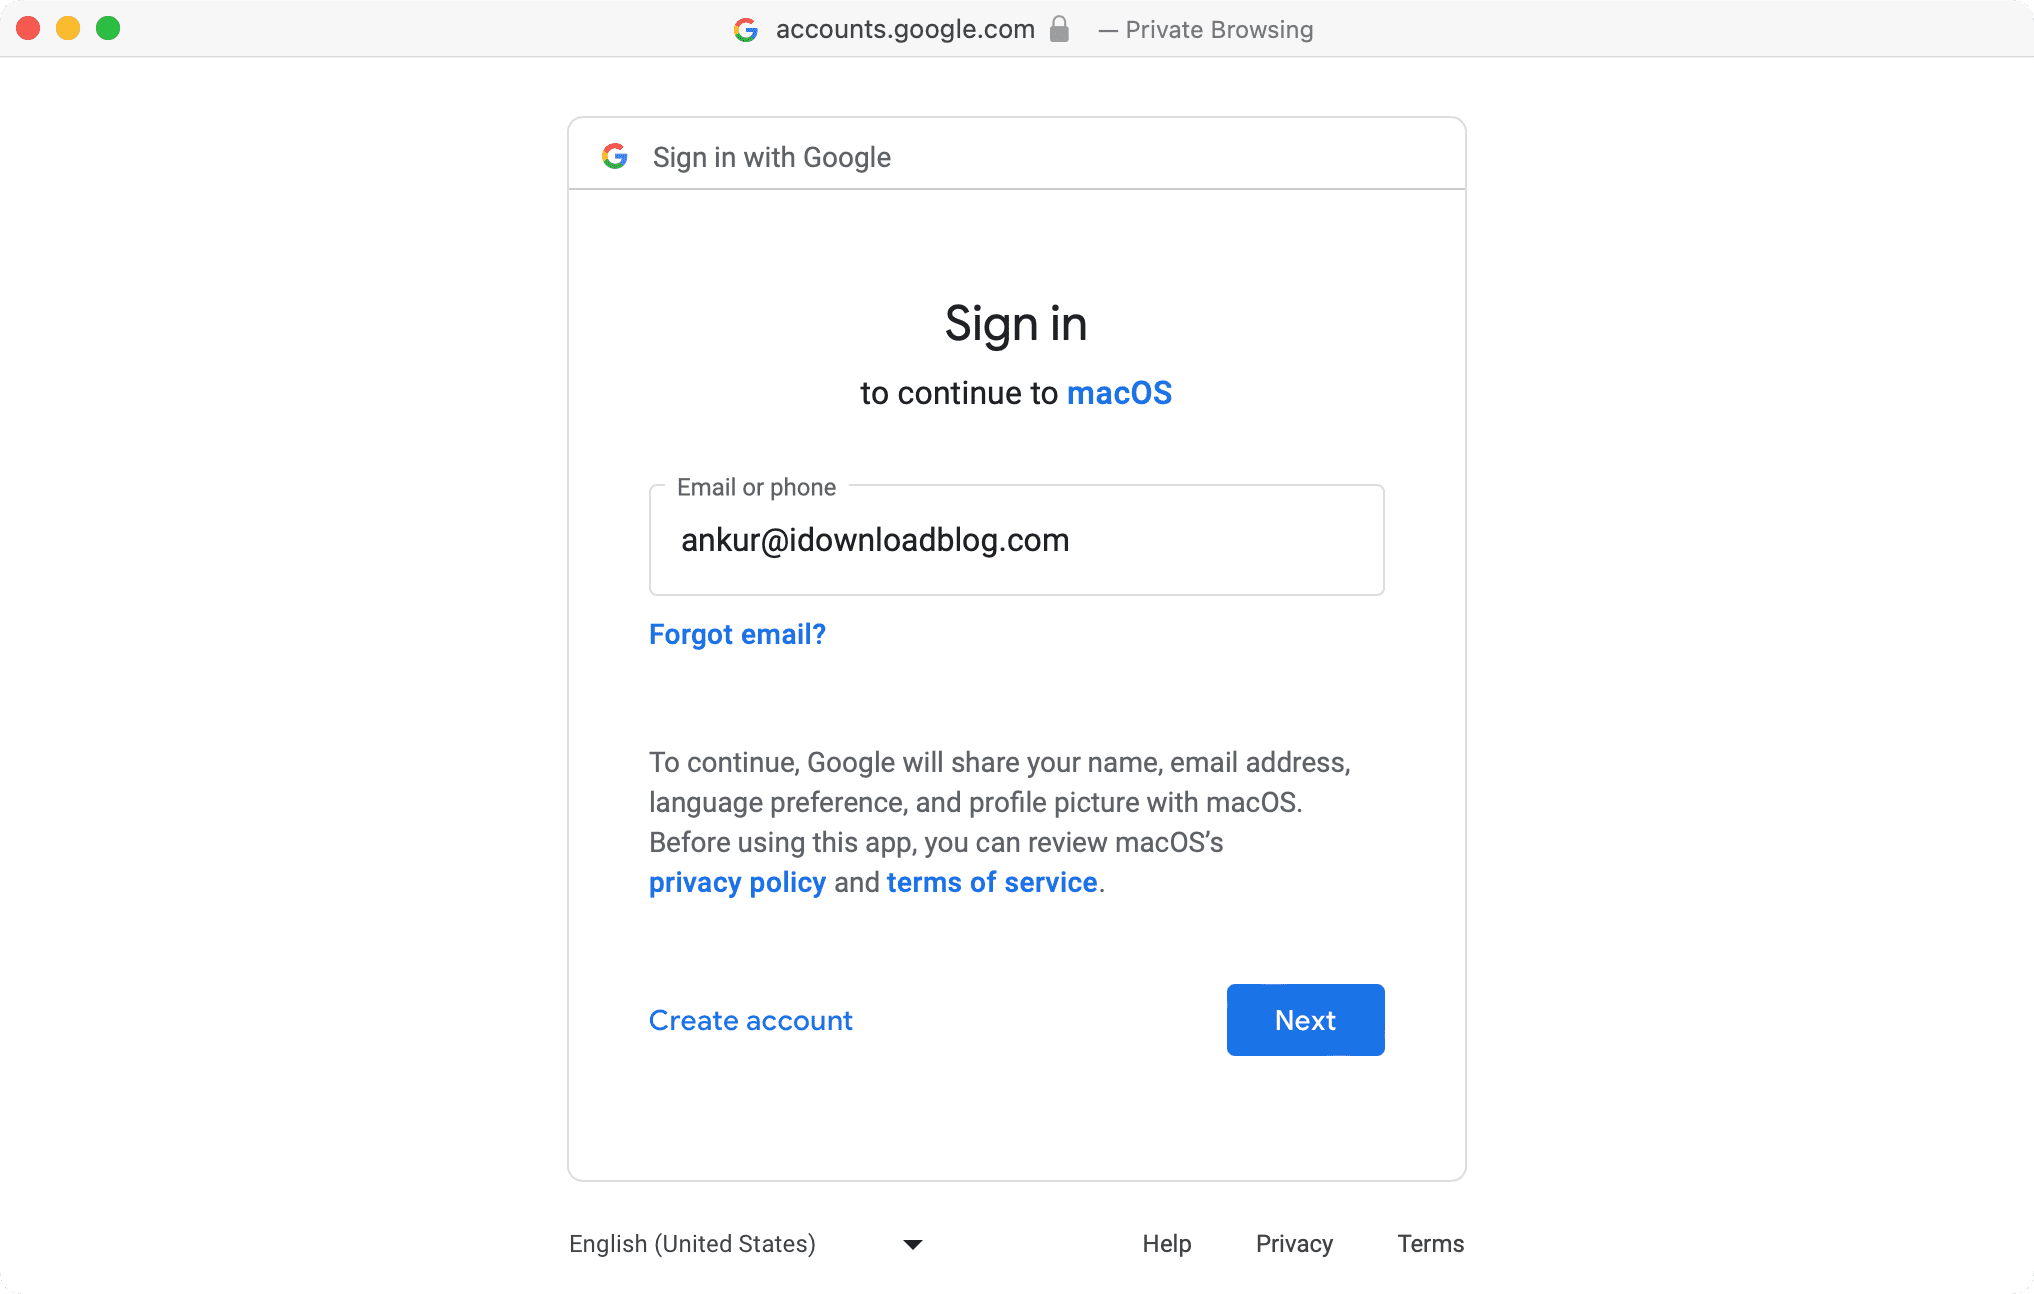 Sign in to continue to macOS screen